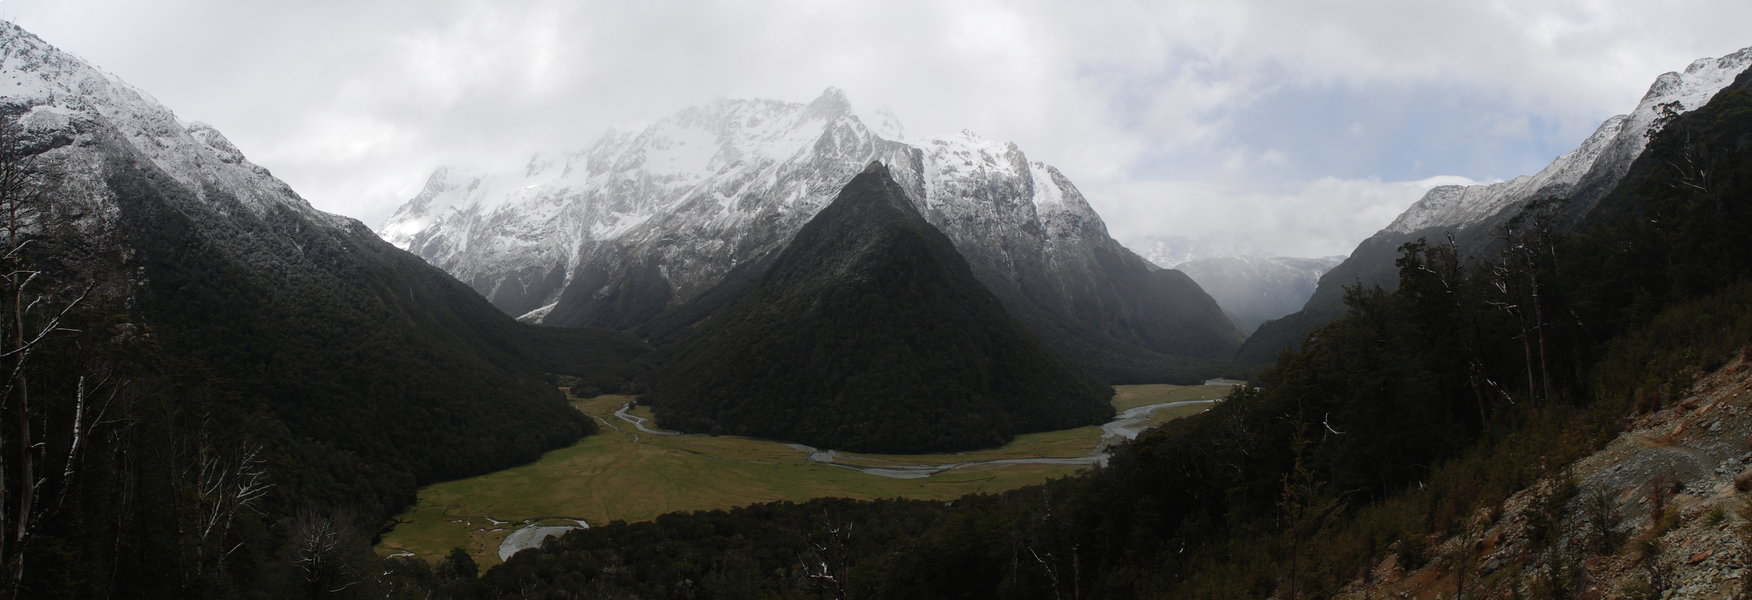 Routeburn Flats From Above